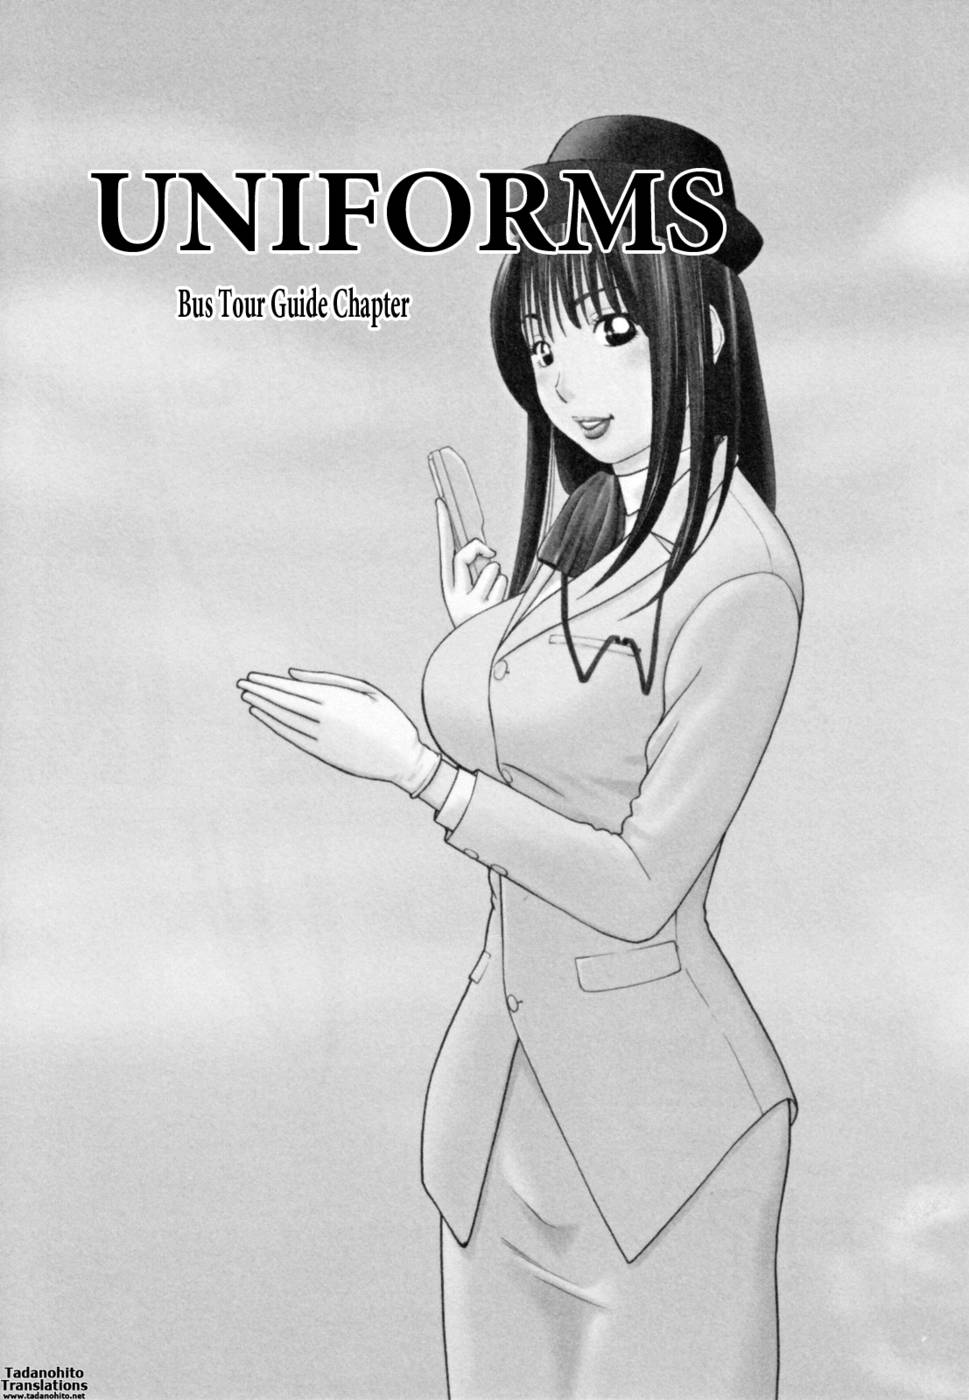 Hentai Manga Comic-32 Year Old Unsatisfied Wife-Chapter 6-Uniforms Bus Tour Guide-1